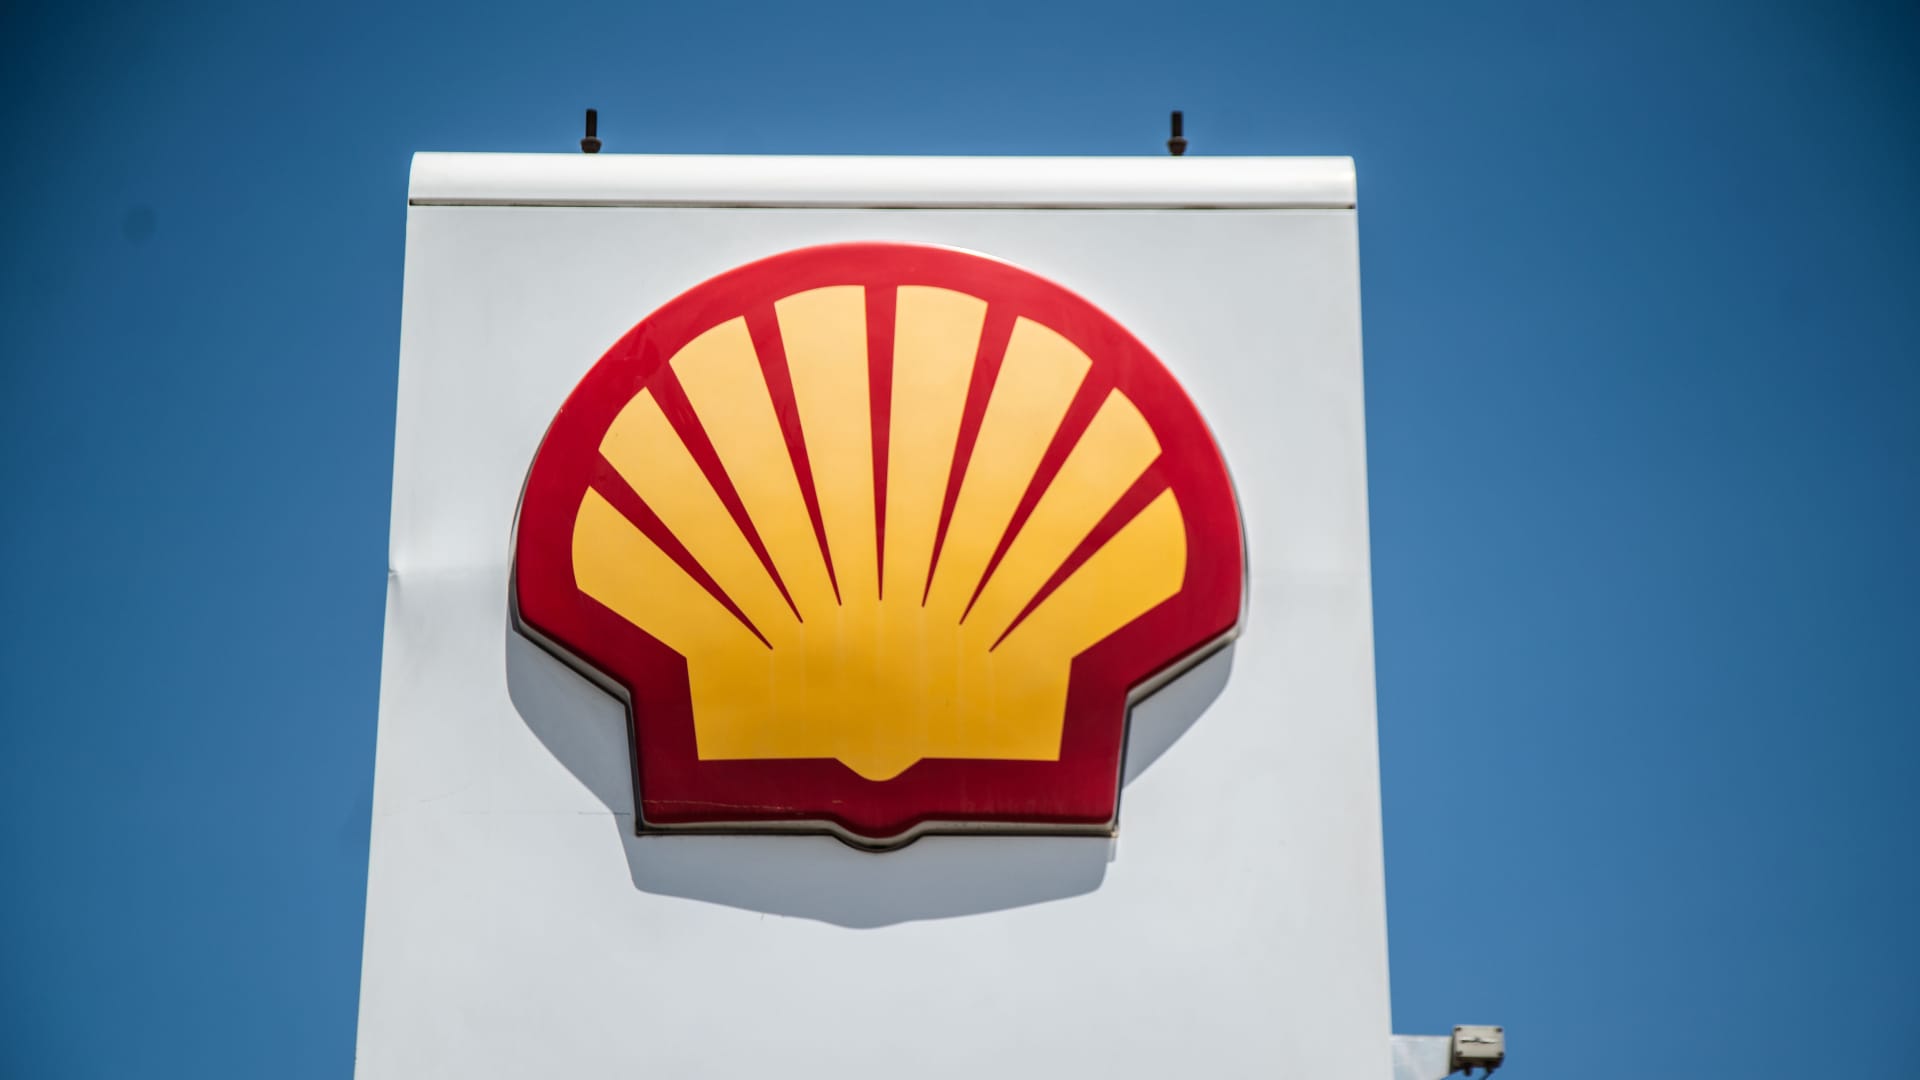  Oil giant Shell waters down its near-term emission cuts in strategy update